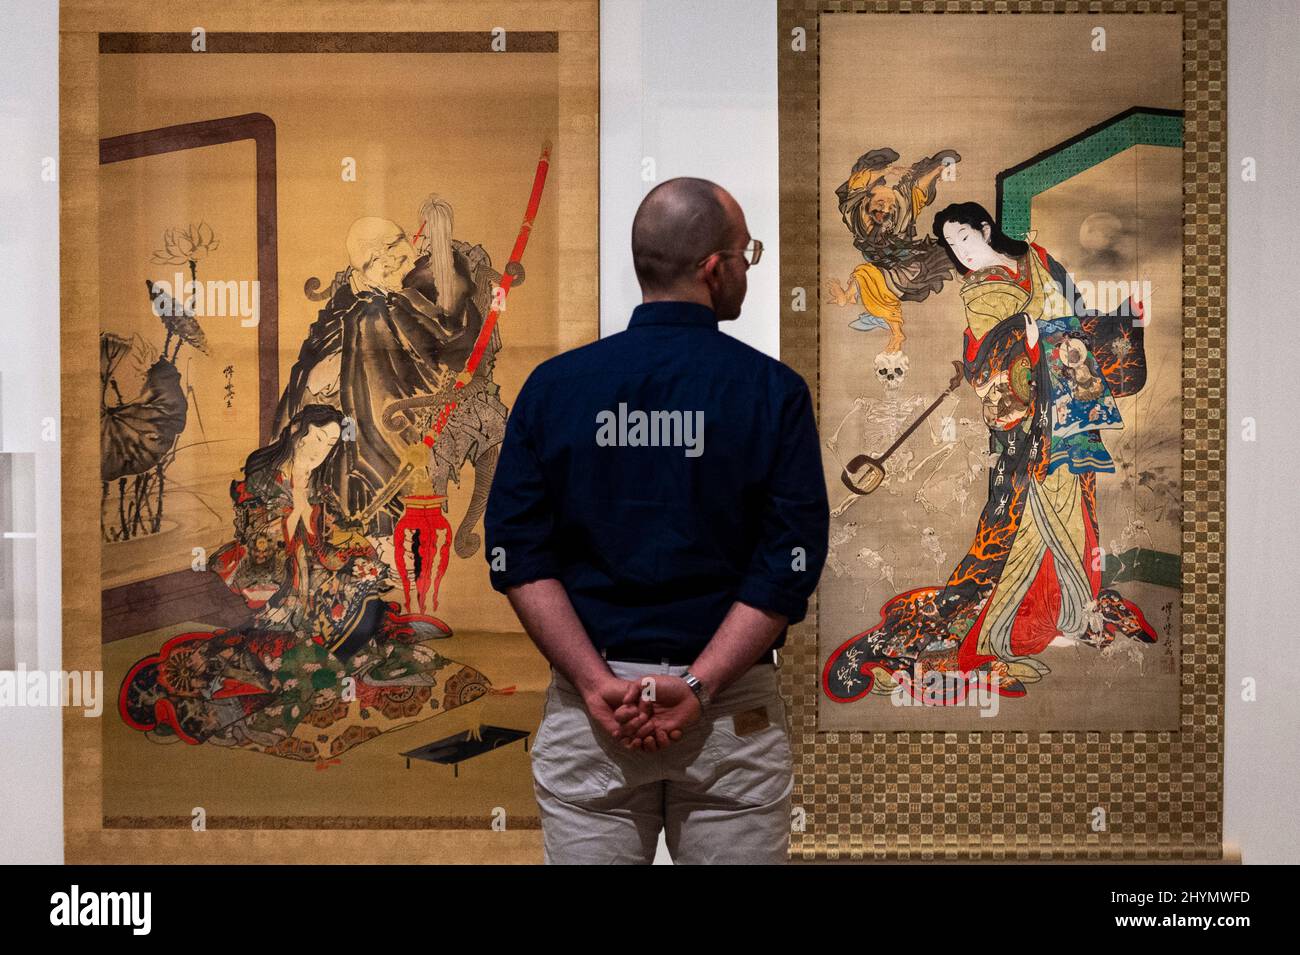 London, UK.  15 March 2022. A staff member views (L) 'Hell Courtesan and Ikkyu' and 'Hell Courtesan, Dancing Ikkyu and Skeletons', both 1871/89, by Kawanabe Kyōsai. Preview of Kyōsai: The Israel Goldman Collection exhibition at the Royal Academy of Arts where 80 works by late 19th century Japanese painter Kawanabe Kyōsai are on display 19 March to 19 June 2022 in the artist’s first solo UK exhibition in 30 years.  Credit: Stephen Chung / Alamy Live News Stock Photo